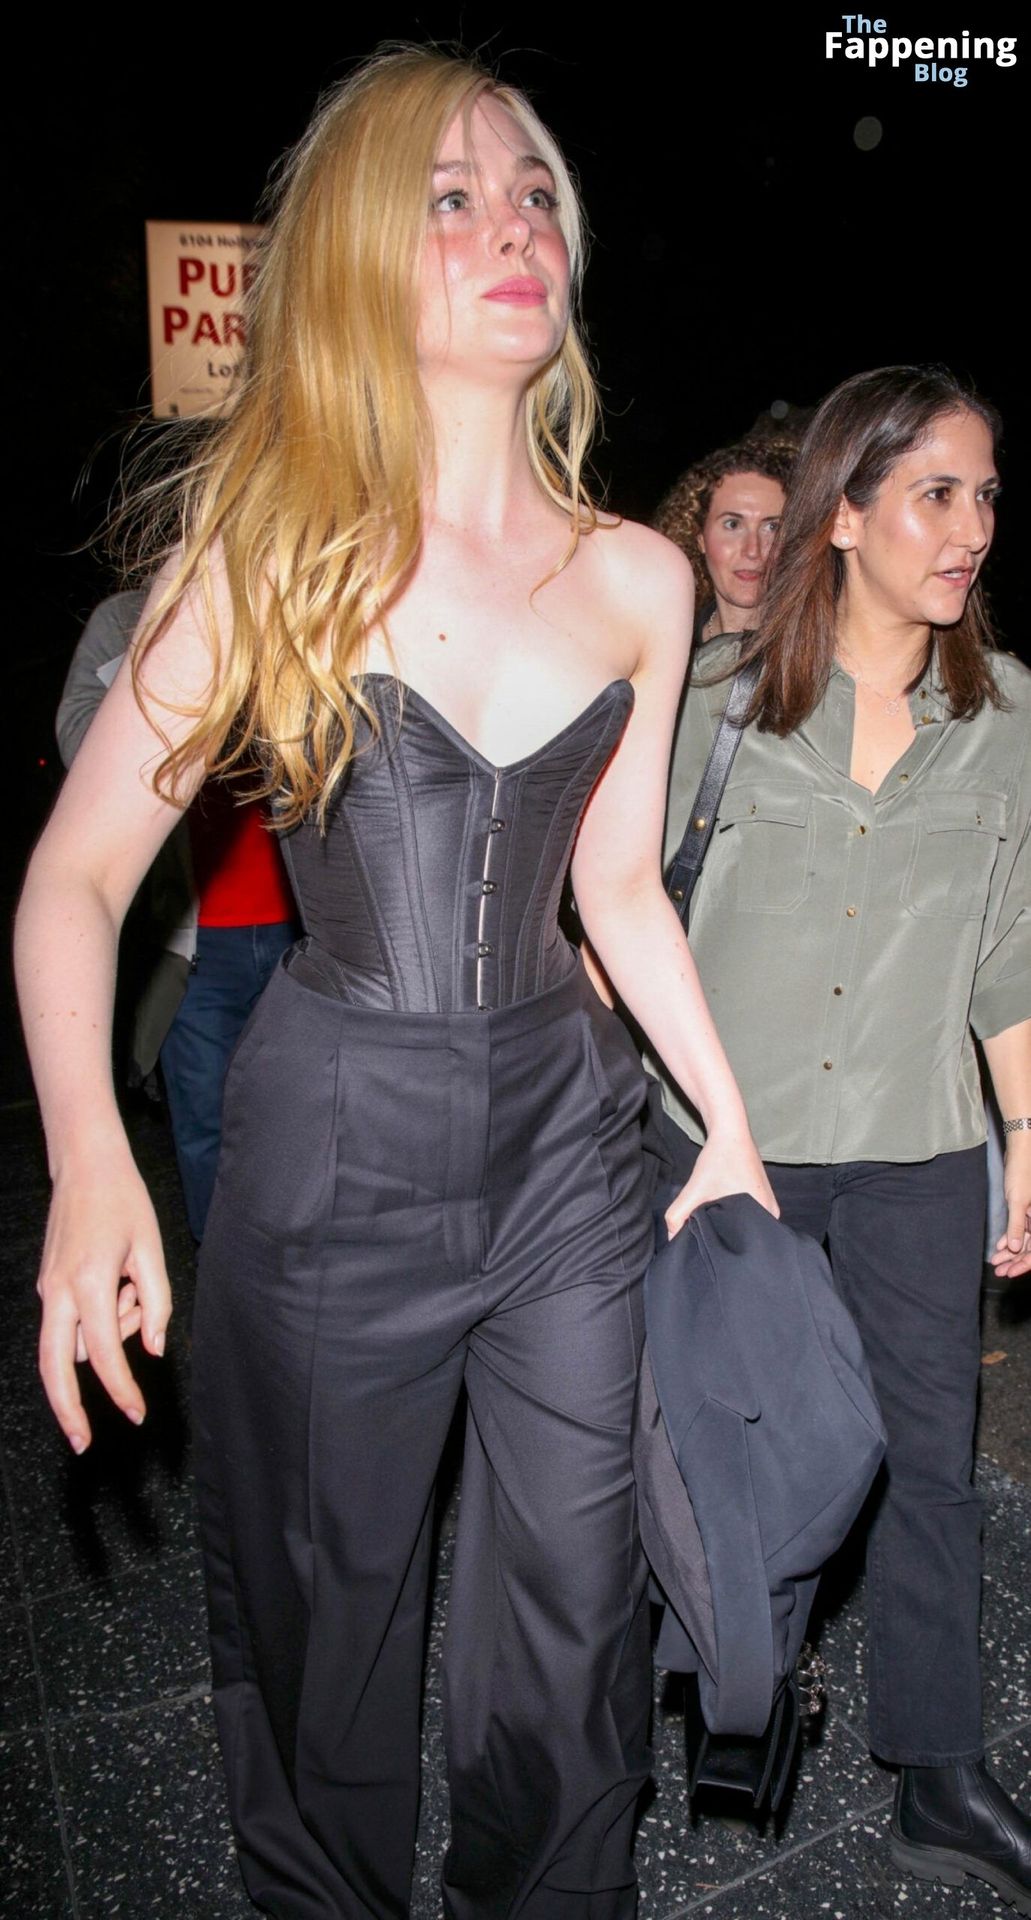 elle-fanning-braless-boobs-cleavage-black-corset-13-scaled-thefappeningblog.com_.jpg